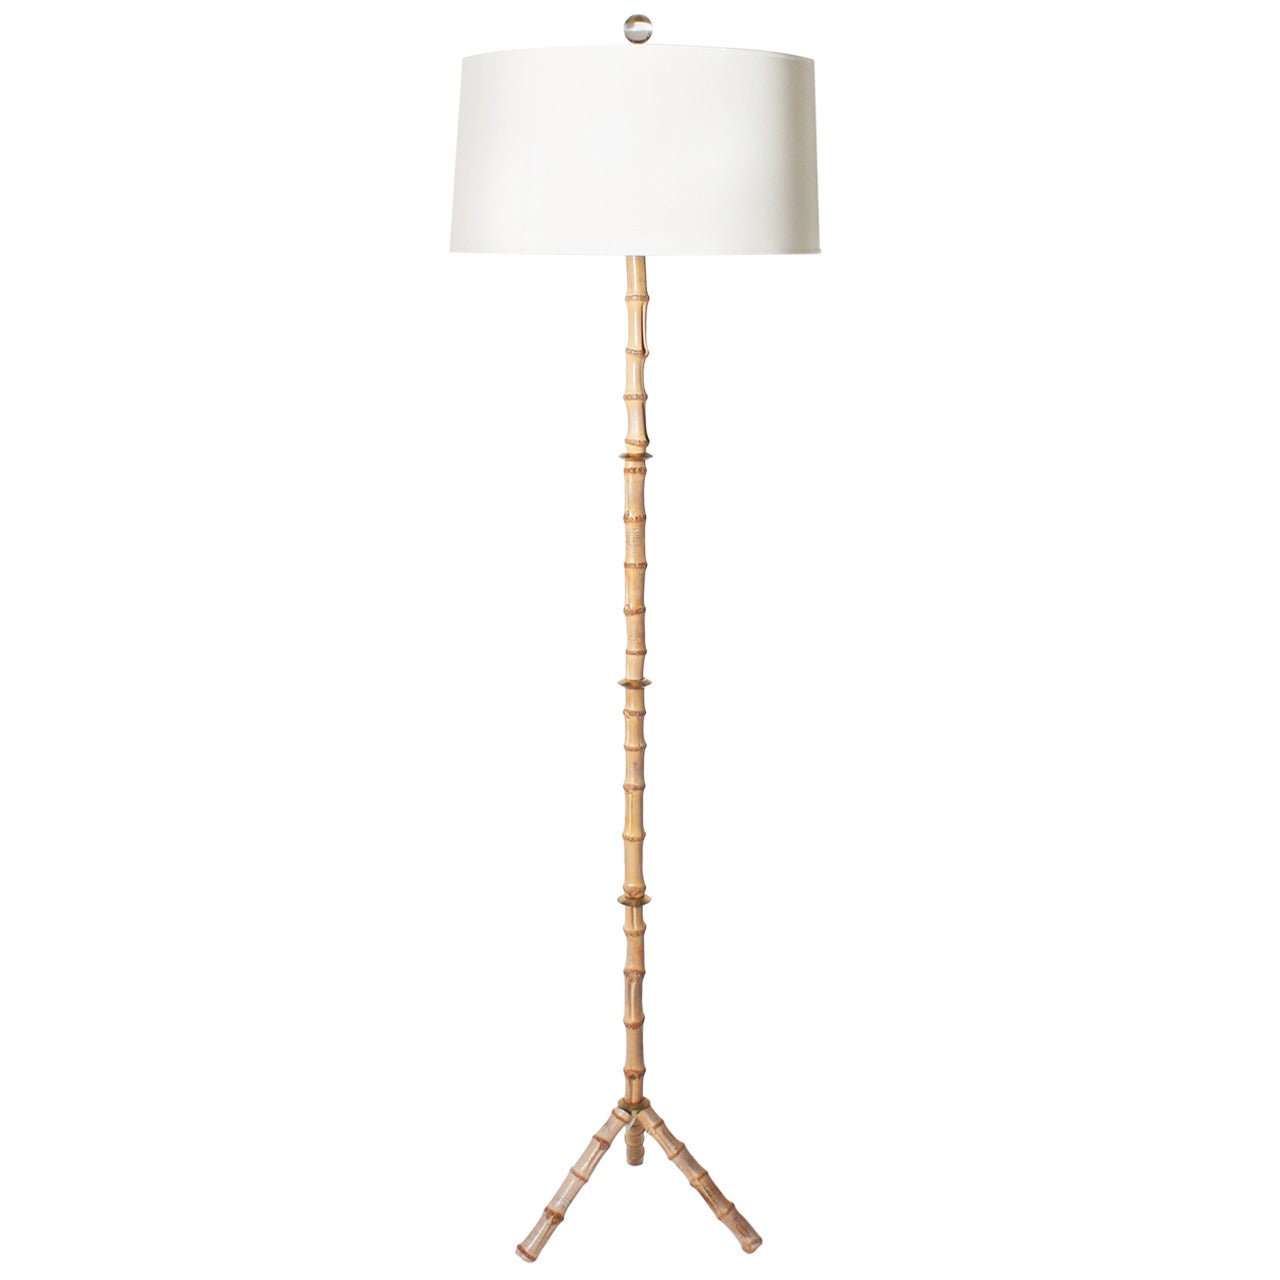 Wooden Bamboo Floor Lamp with Brass Accents, circa 1960